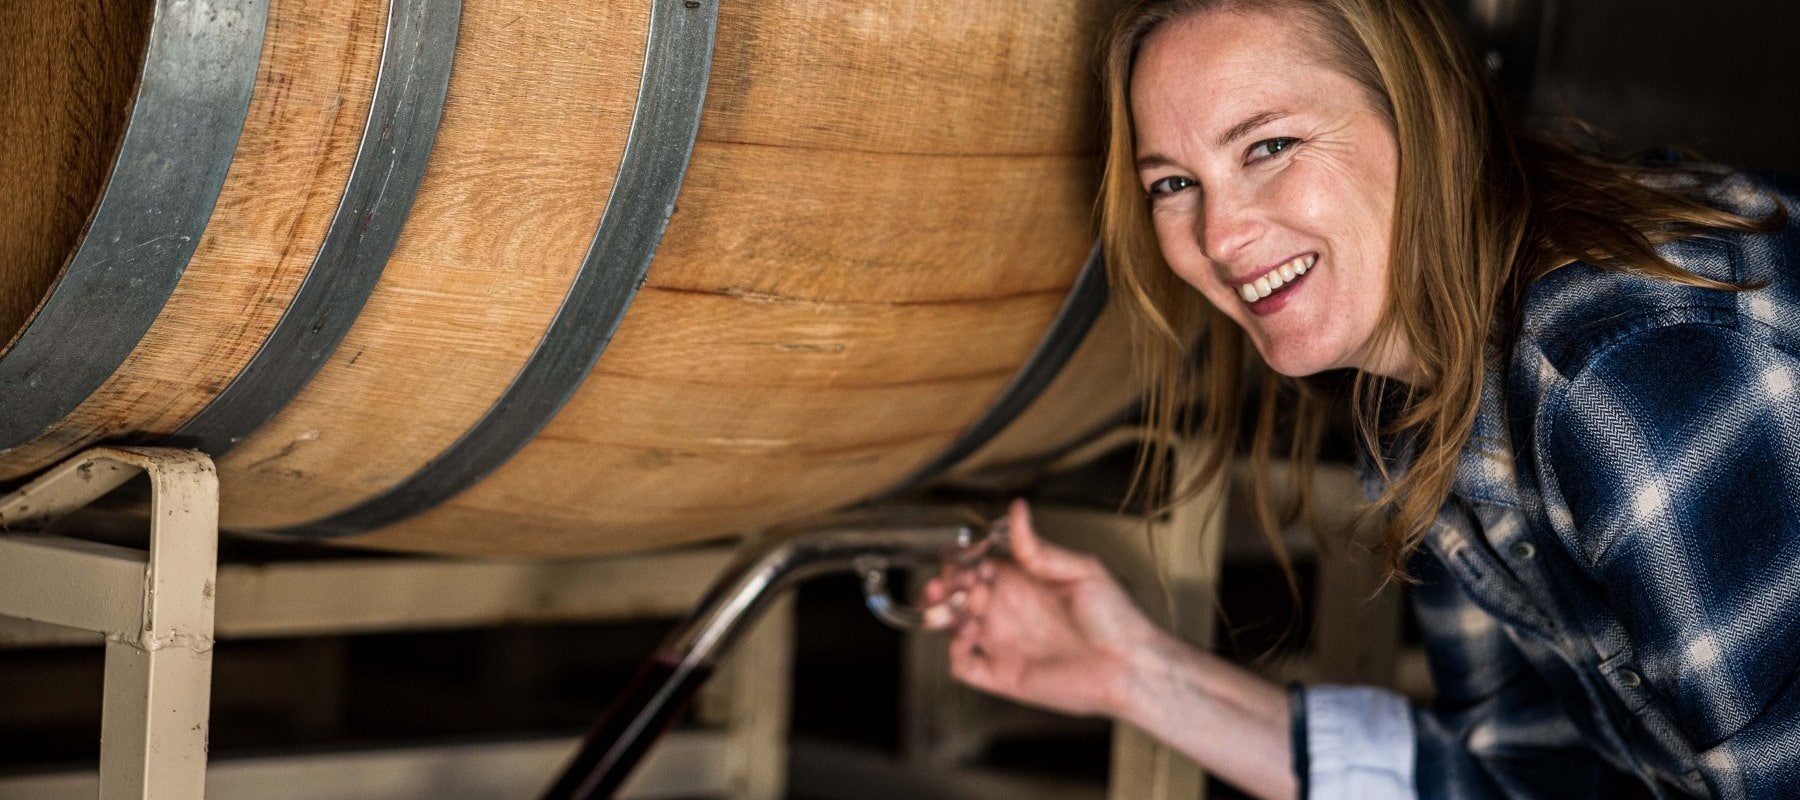 Winemaker Meredith Sarboraria is wearing a blue plaid shirt and smilingwhile using a wine thief to take a sample of wine straight from a barrel in the RM cellar